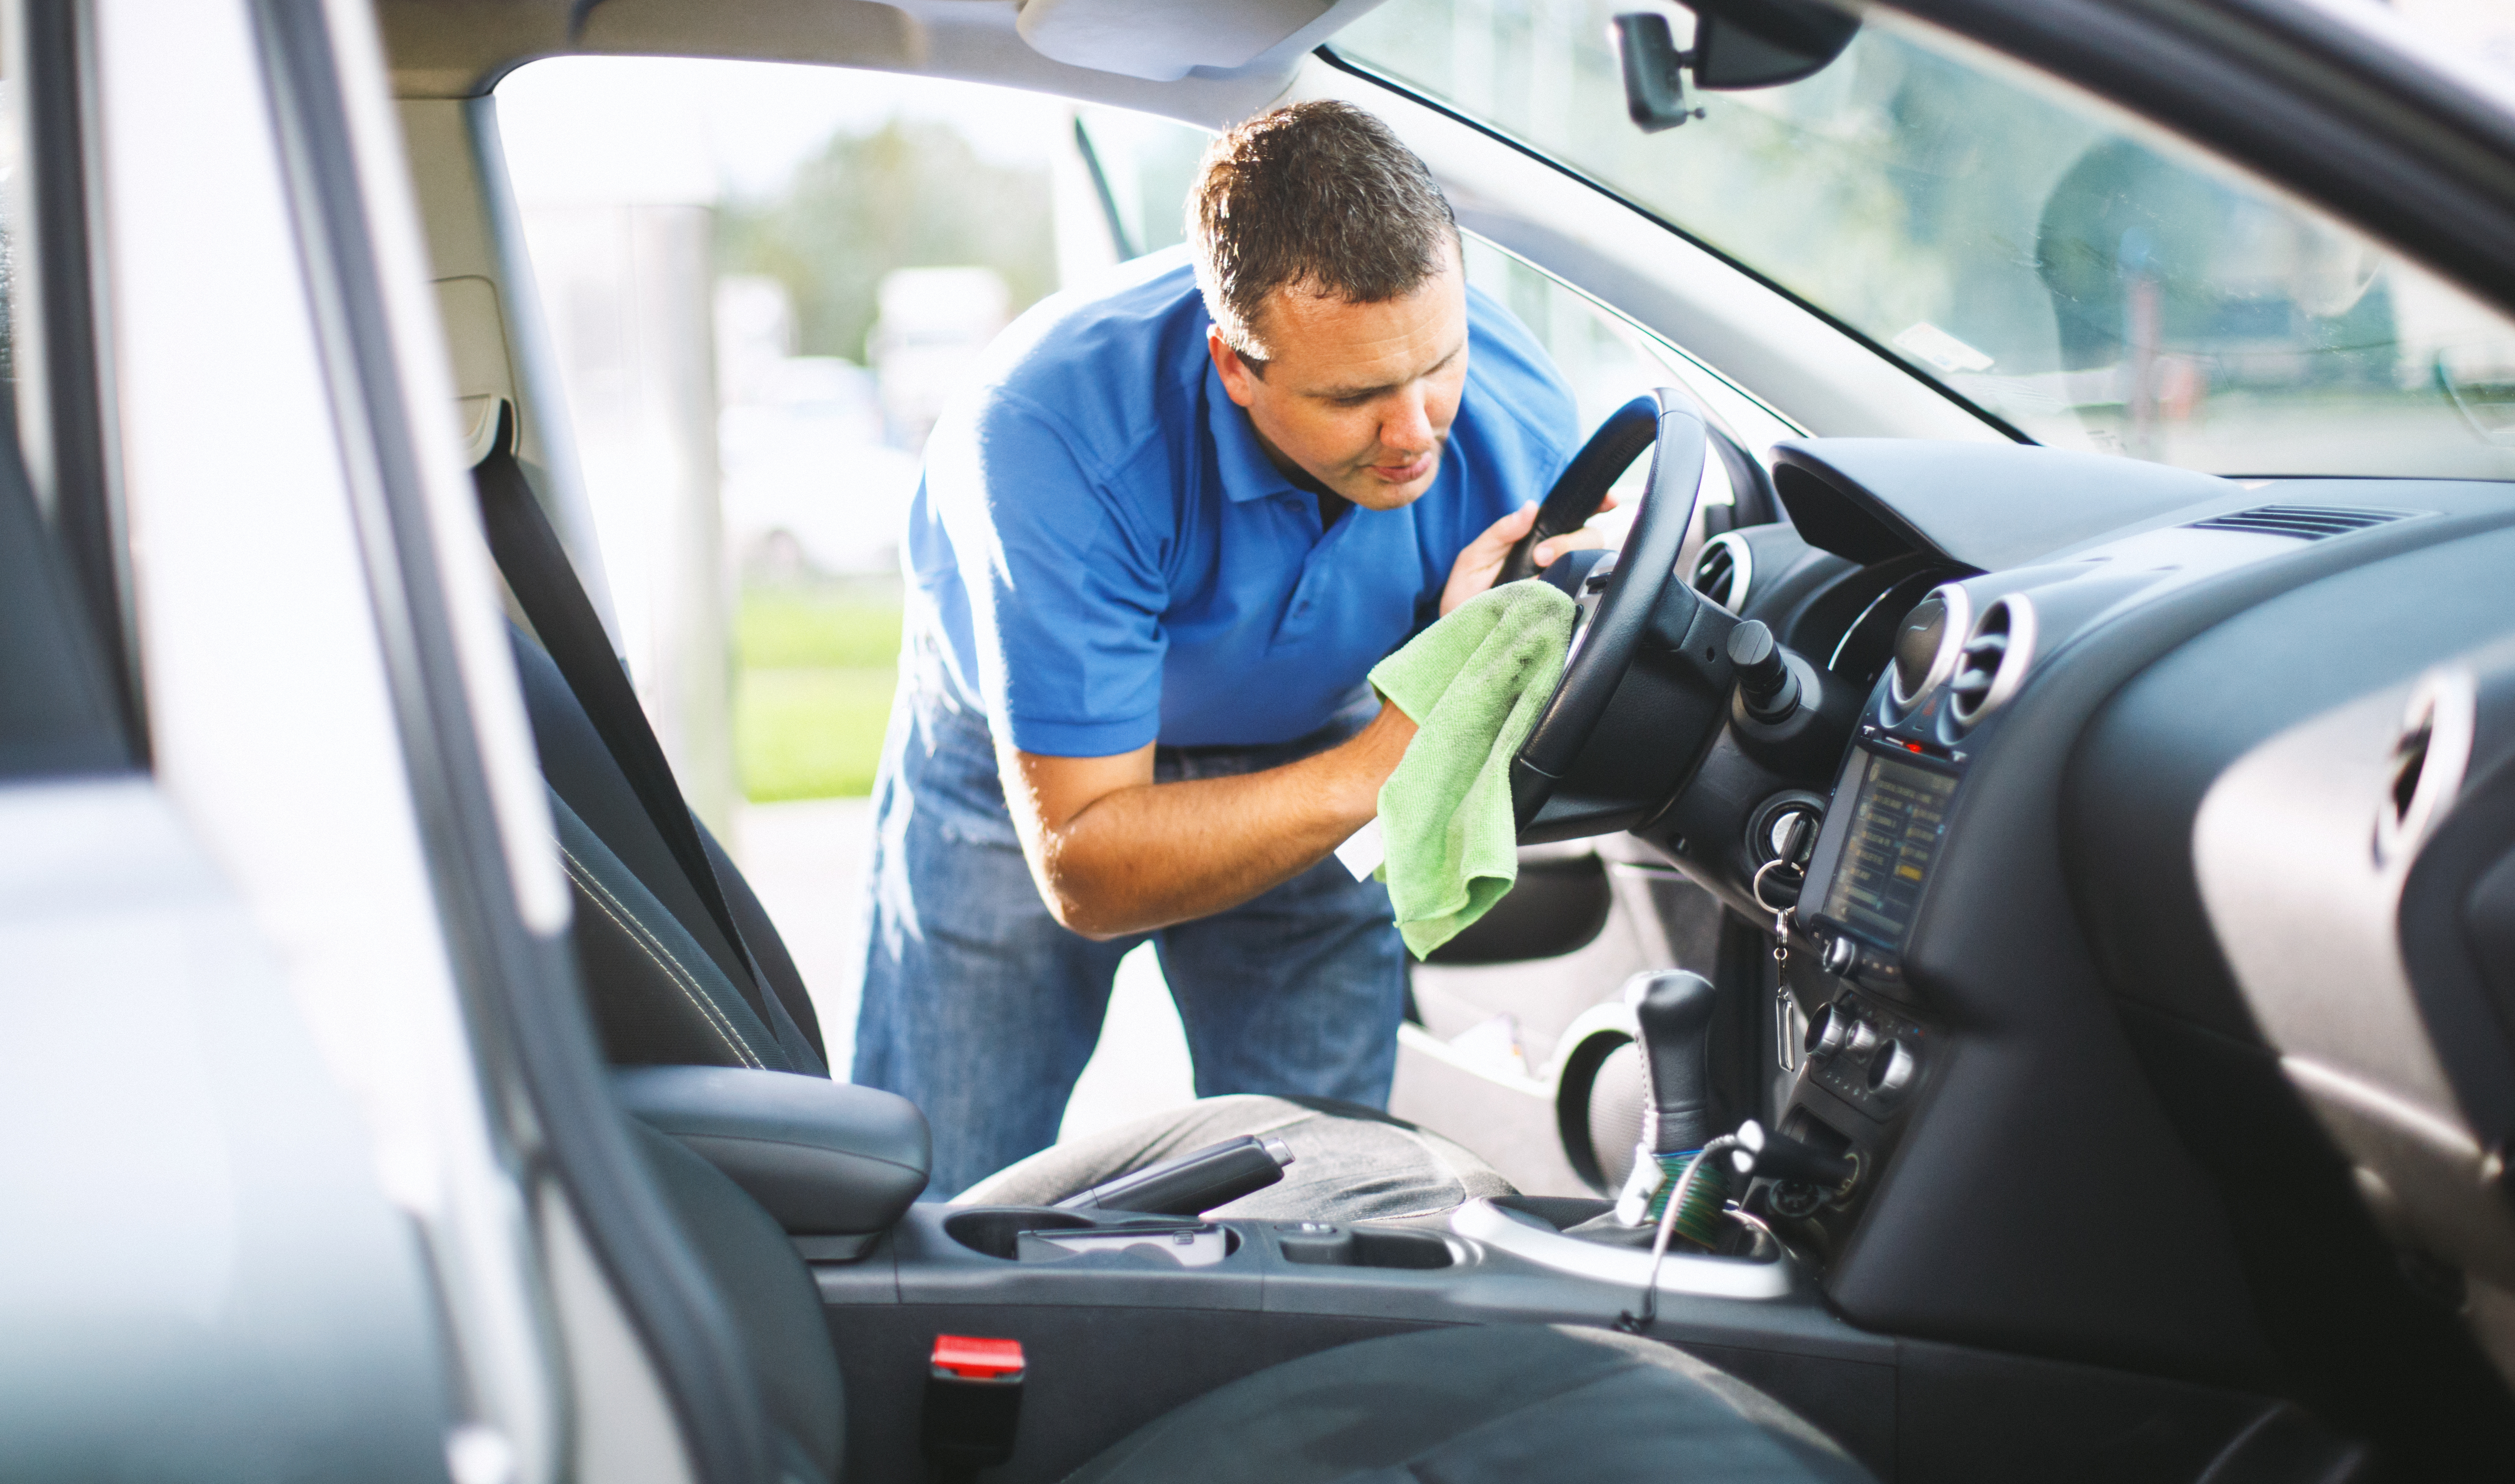 How Much Does Car Detailing Cost? - NerdWallet